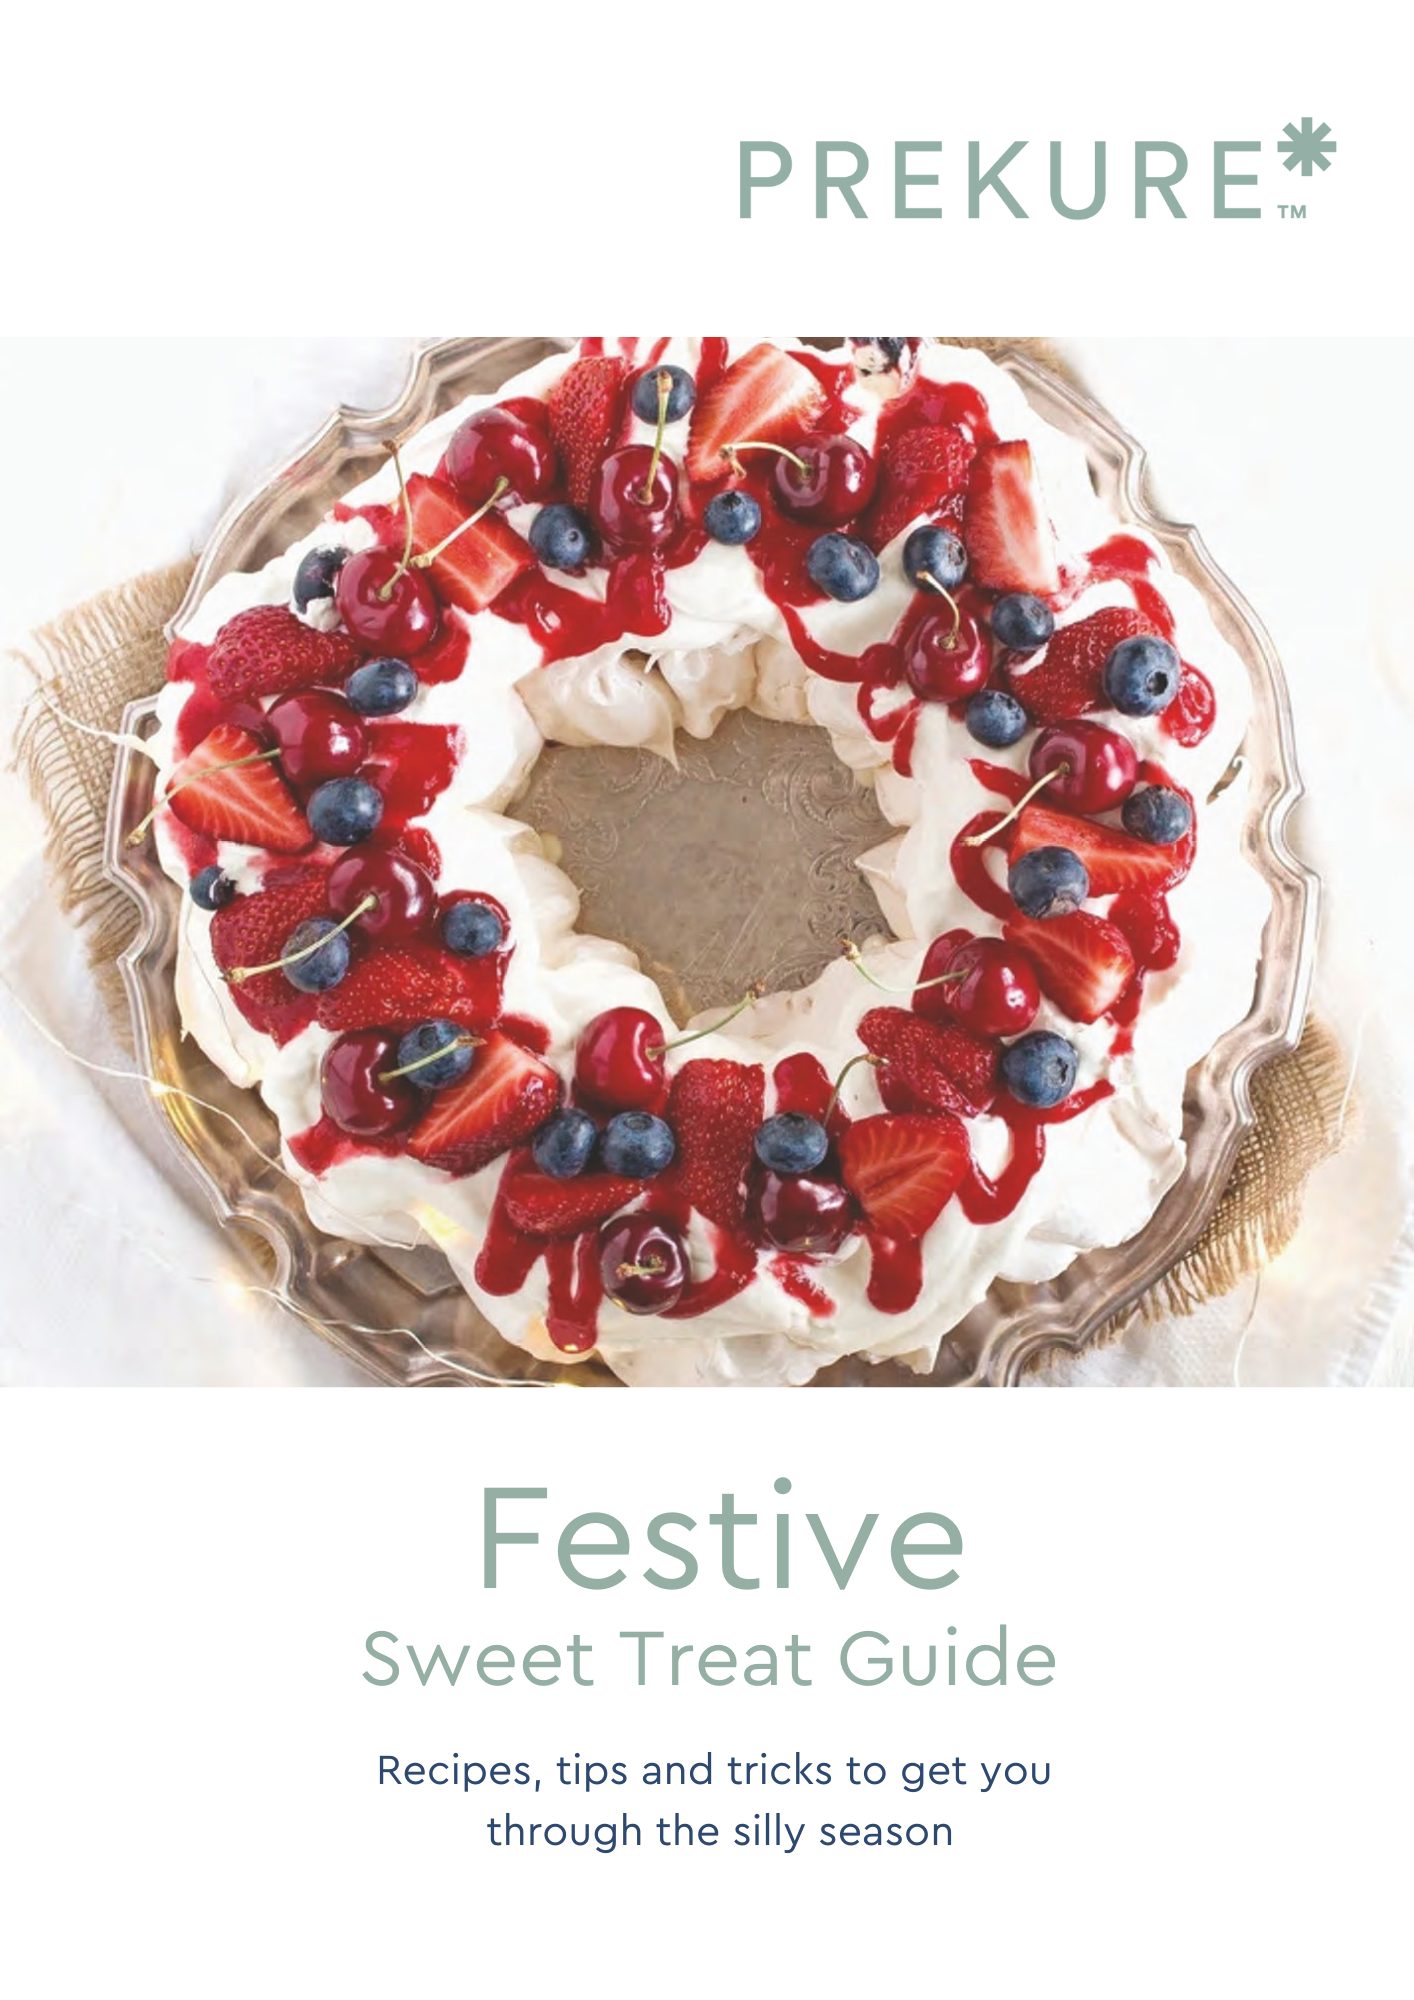 Download our Festive Sweet Treat Guide